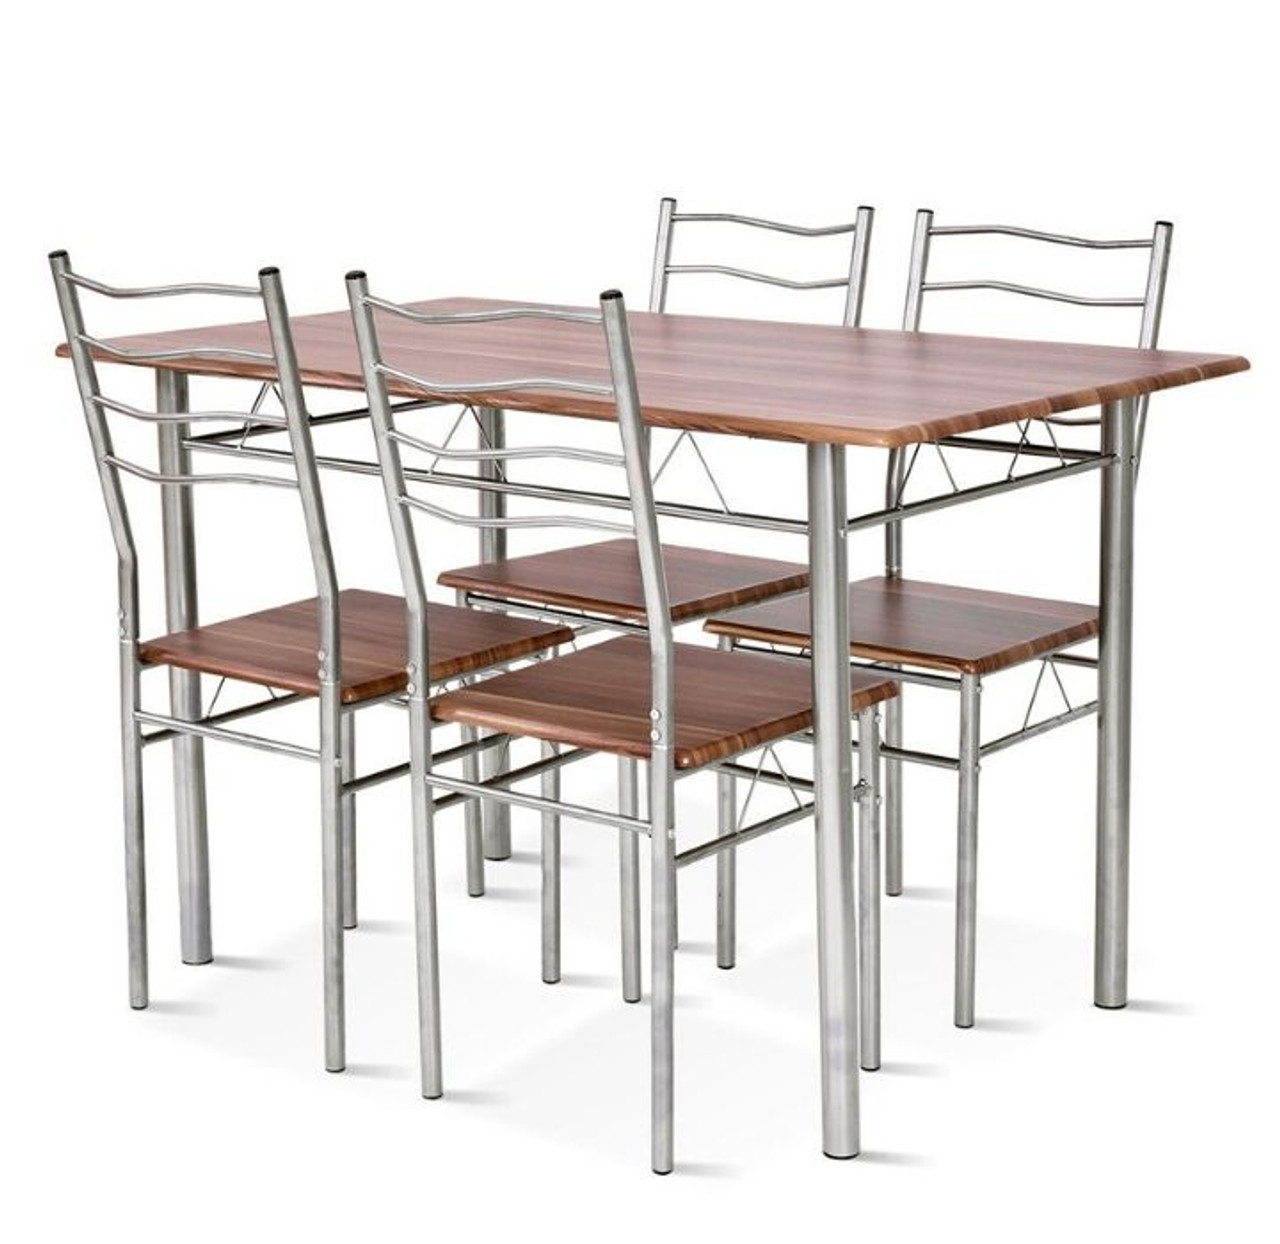 Modern Wood and Metal 5-Piece Dining Table Set product image